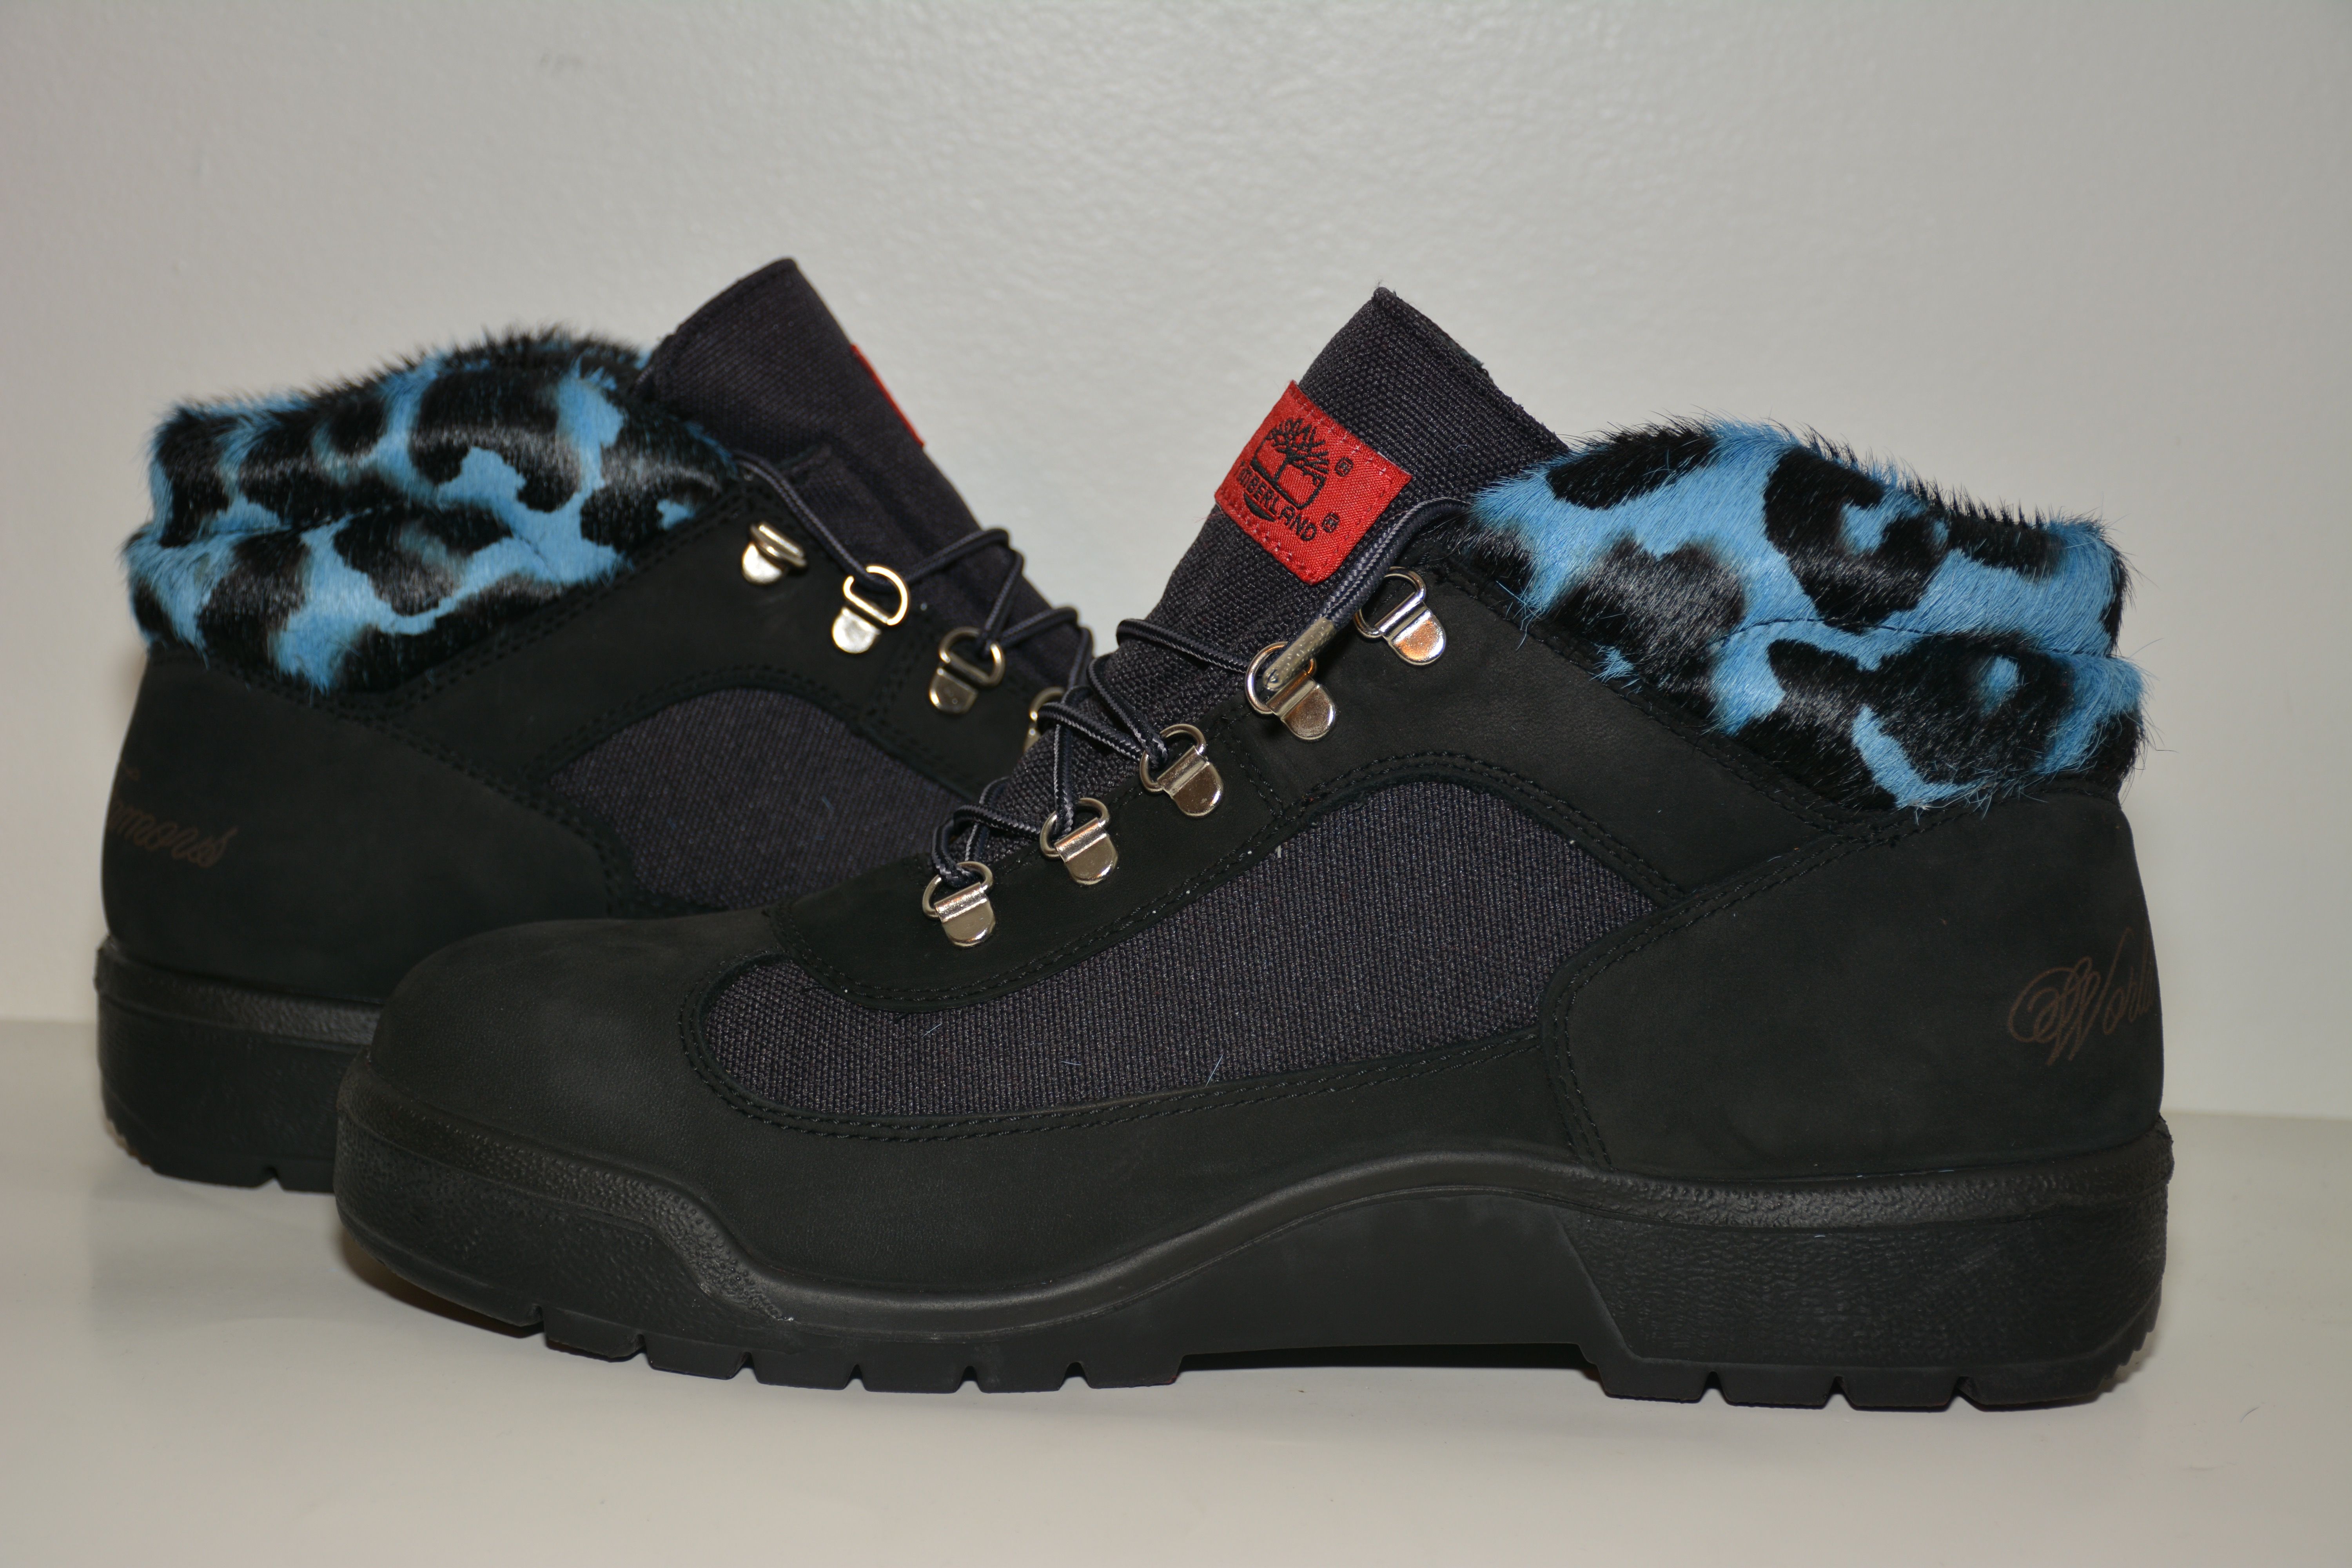 Timberland Supreme X TImberland Field Boot Blue Leopard 2006 Size 12 Rare Size US 12 / EU 45 - 1 Preview